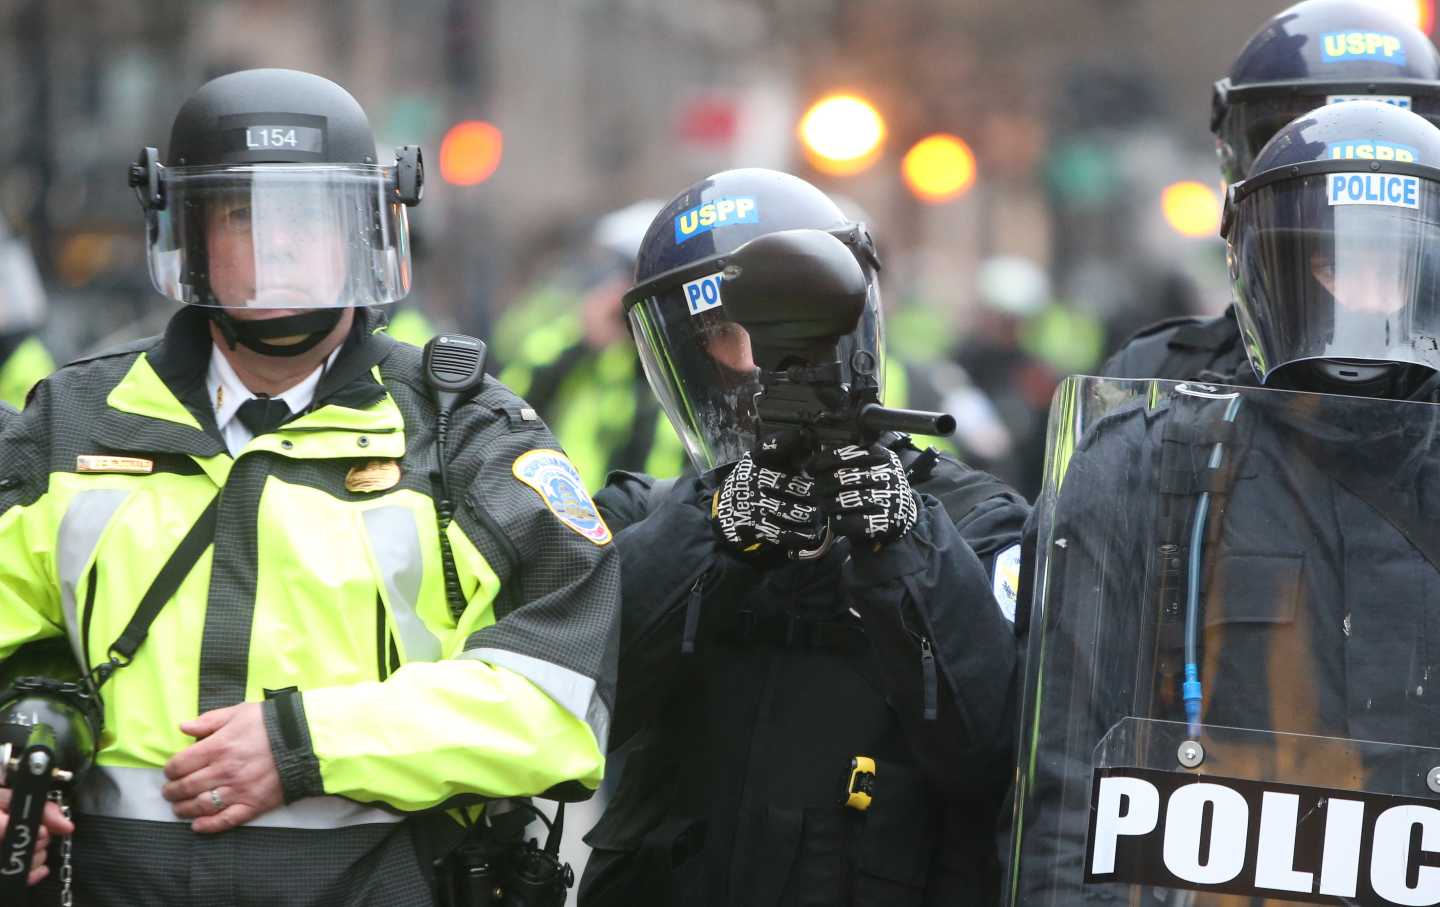 Police officers on the streets of downtown Washington, D.C., on Trump's inauguration day.